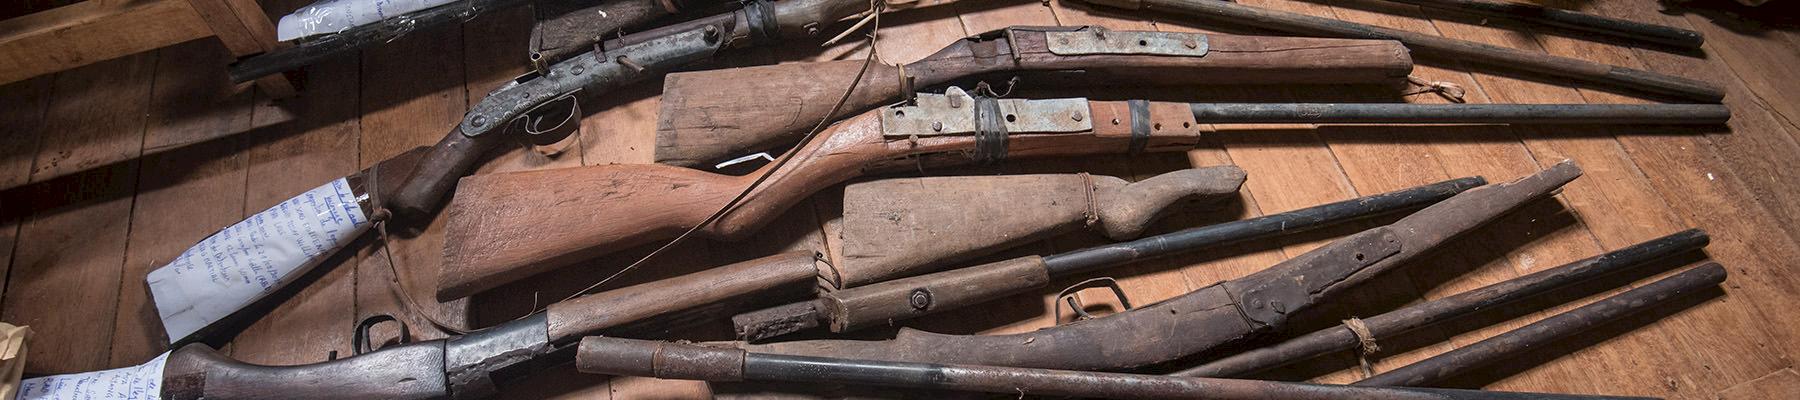 Homemade firearms seized from poachers in Dja National Park, Cameroon © A. Walmsley / TRAFFIC